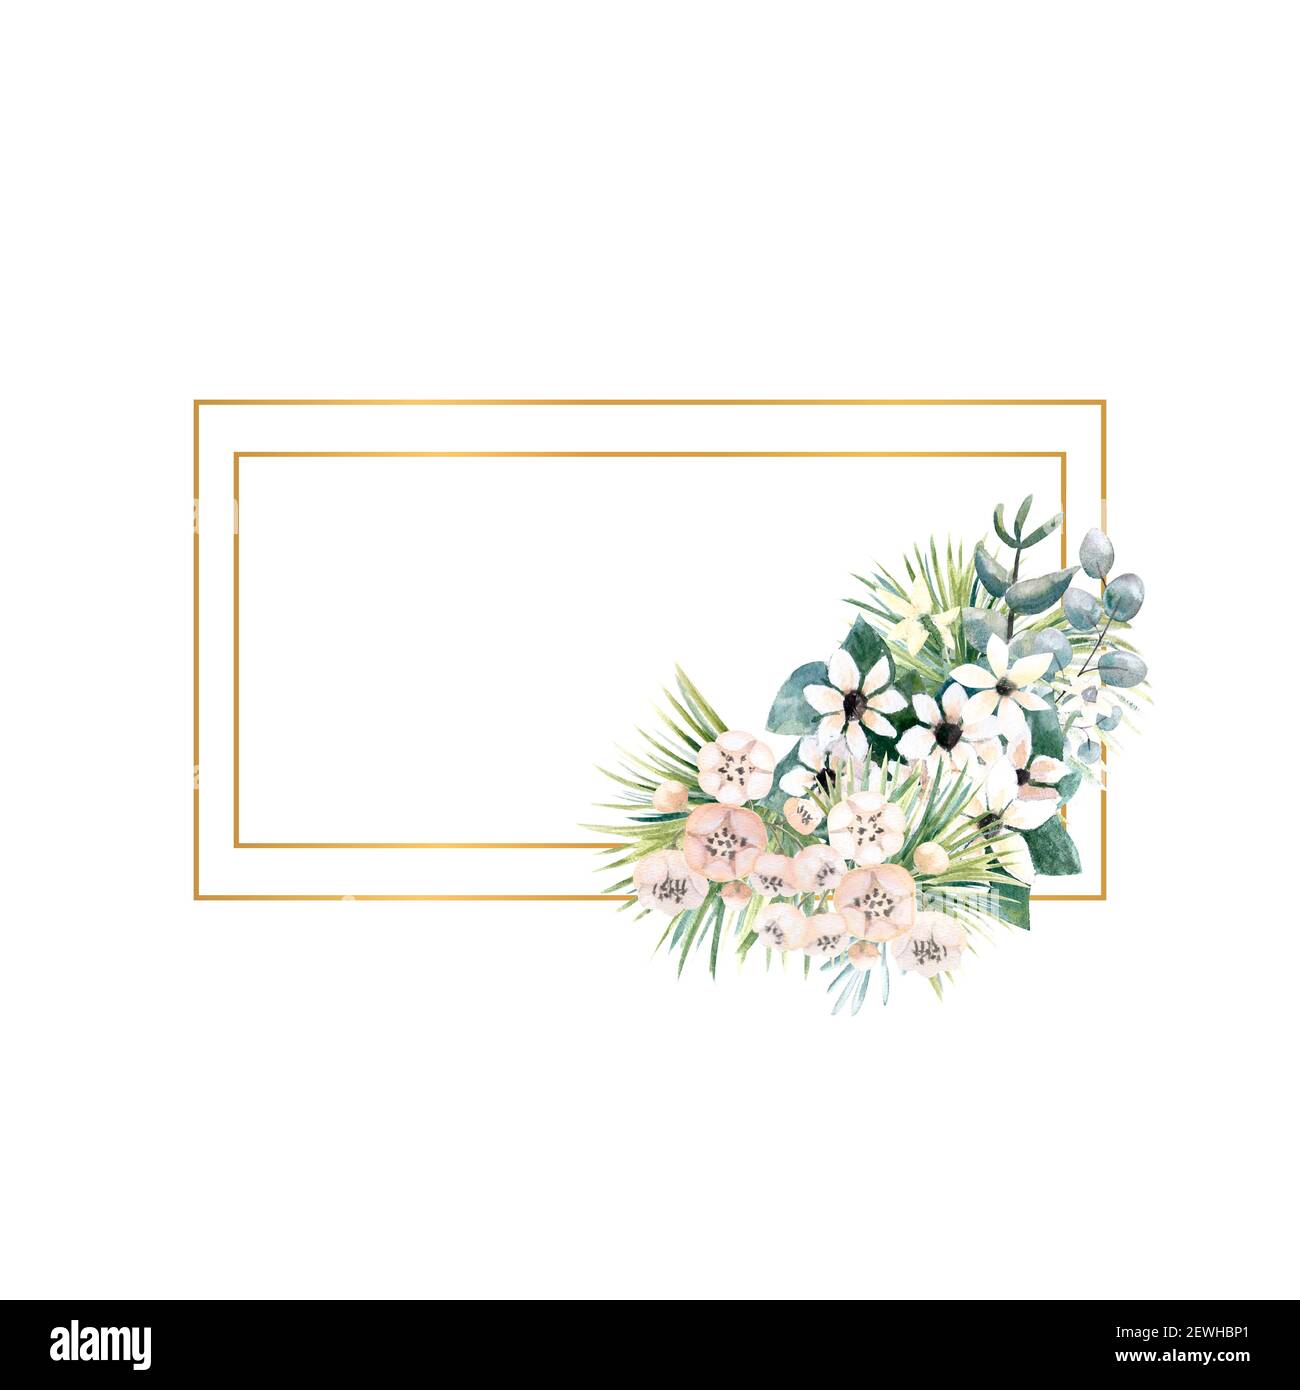 Rectangular gold frame with small flowers of actinidia, bouvardia, tropical and palm leaves. Wedding bouquet in a frame for the design of a stylish Stock Photo